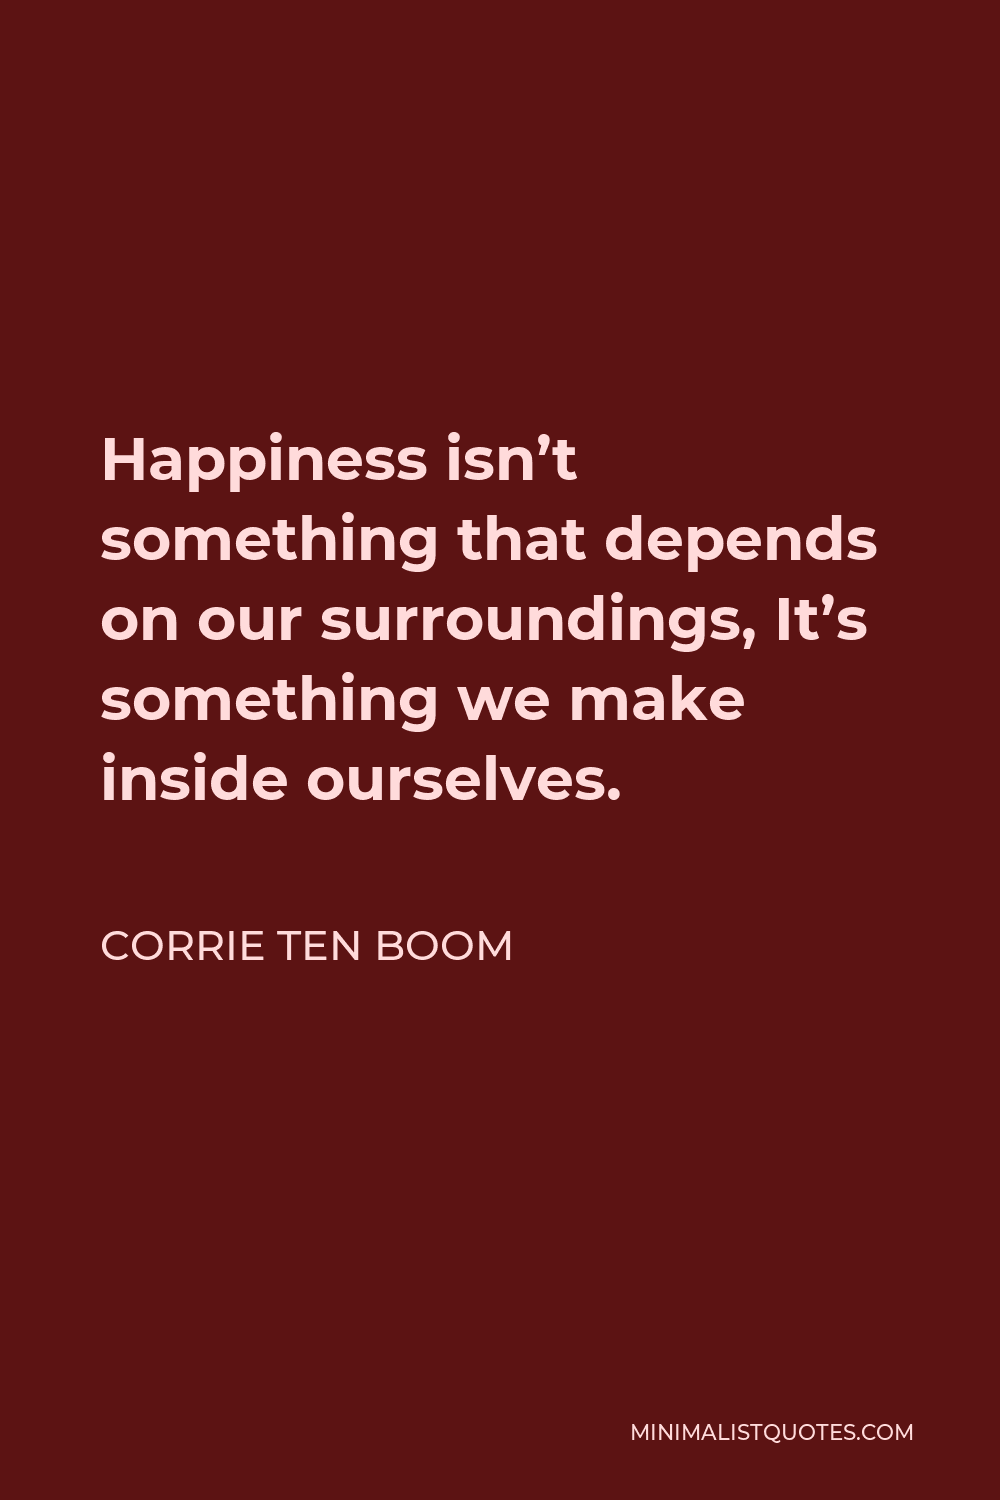 Corrie ten Boom Quote - Happiness isn’t something that depends on our surroundings, It’s something we make inside ourselves.